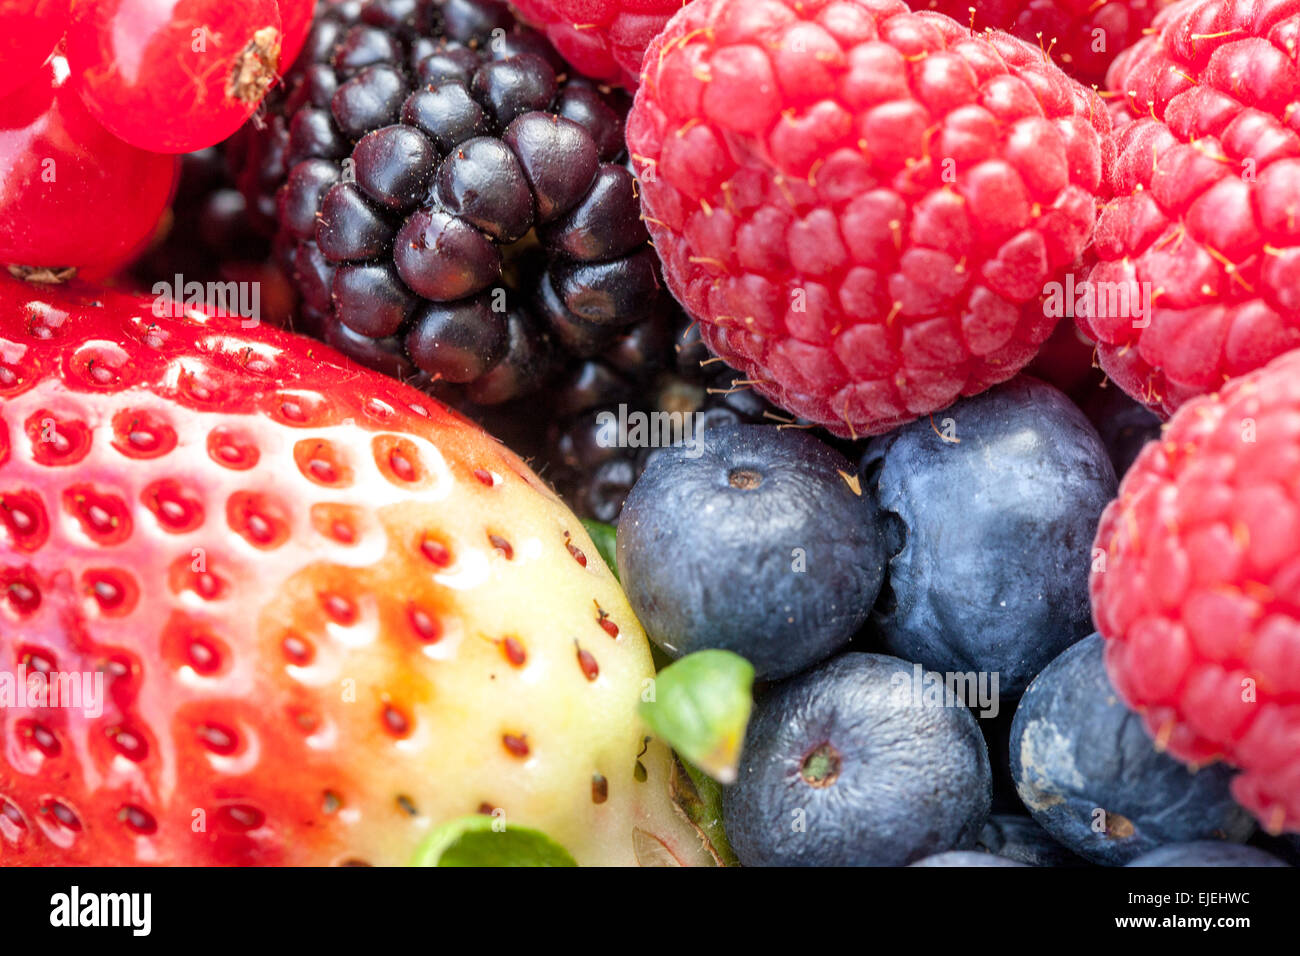 Mixed berries, Strawberry, Raspberry, Blueberry fruits, close up a texture Stock Photo